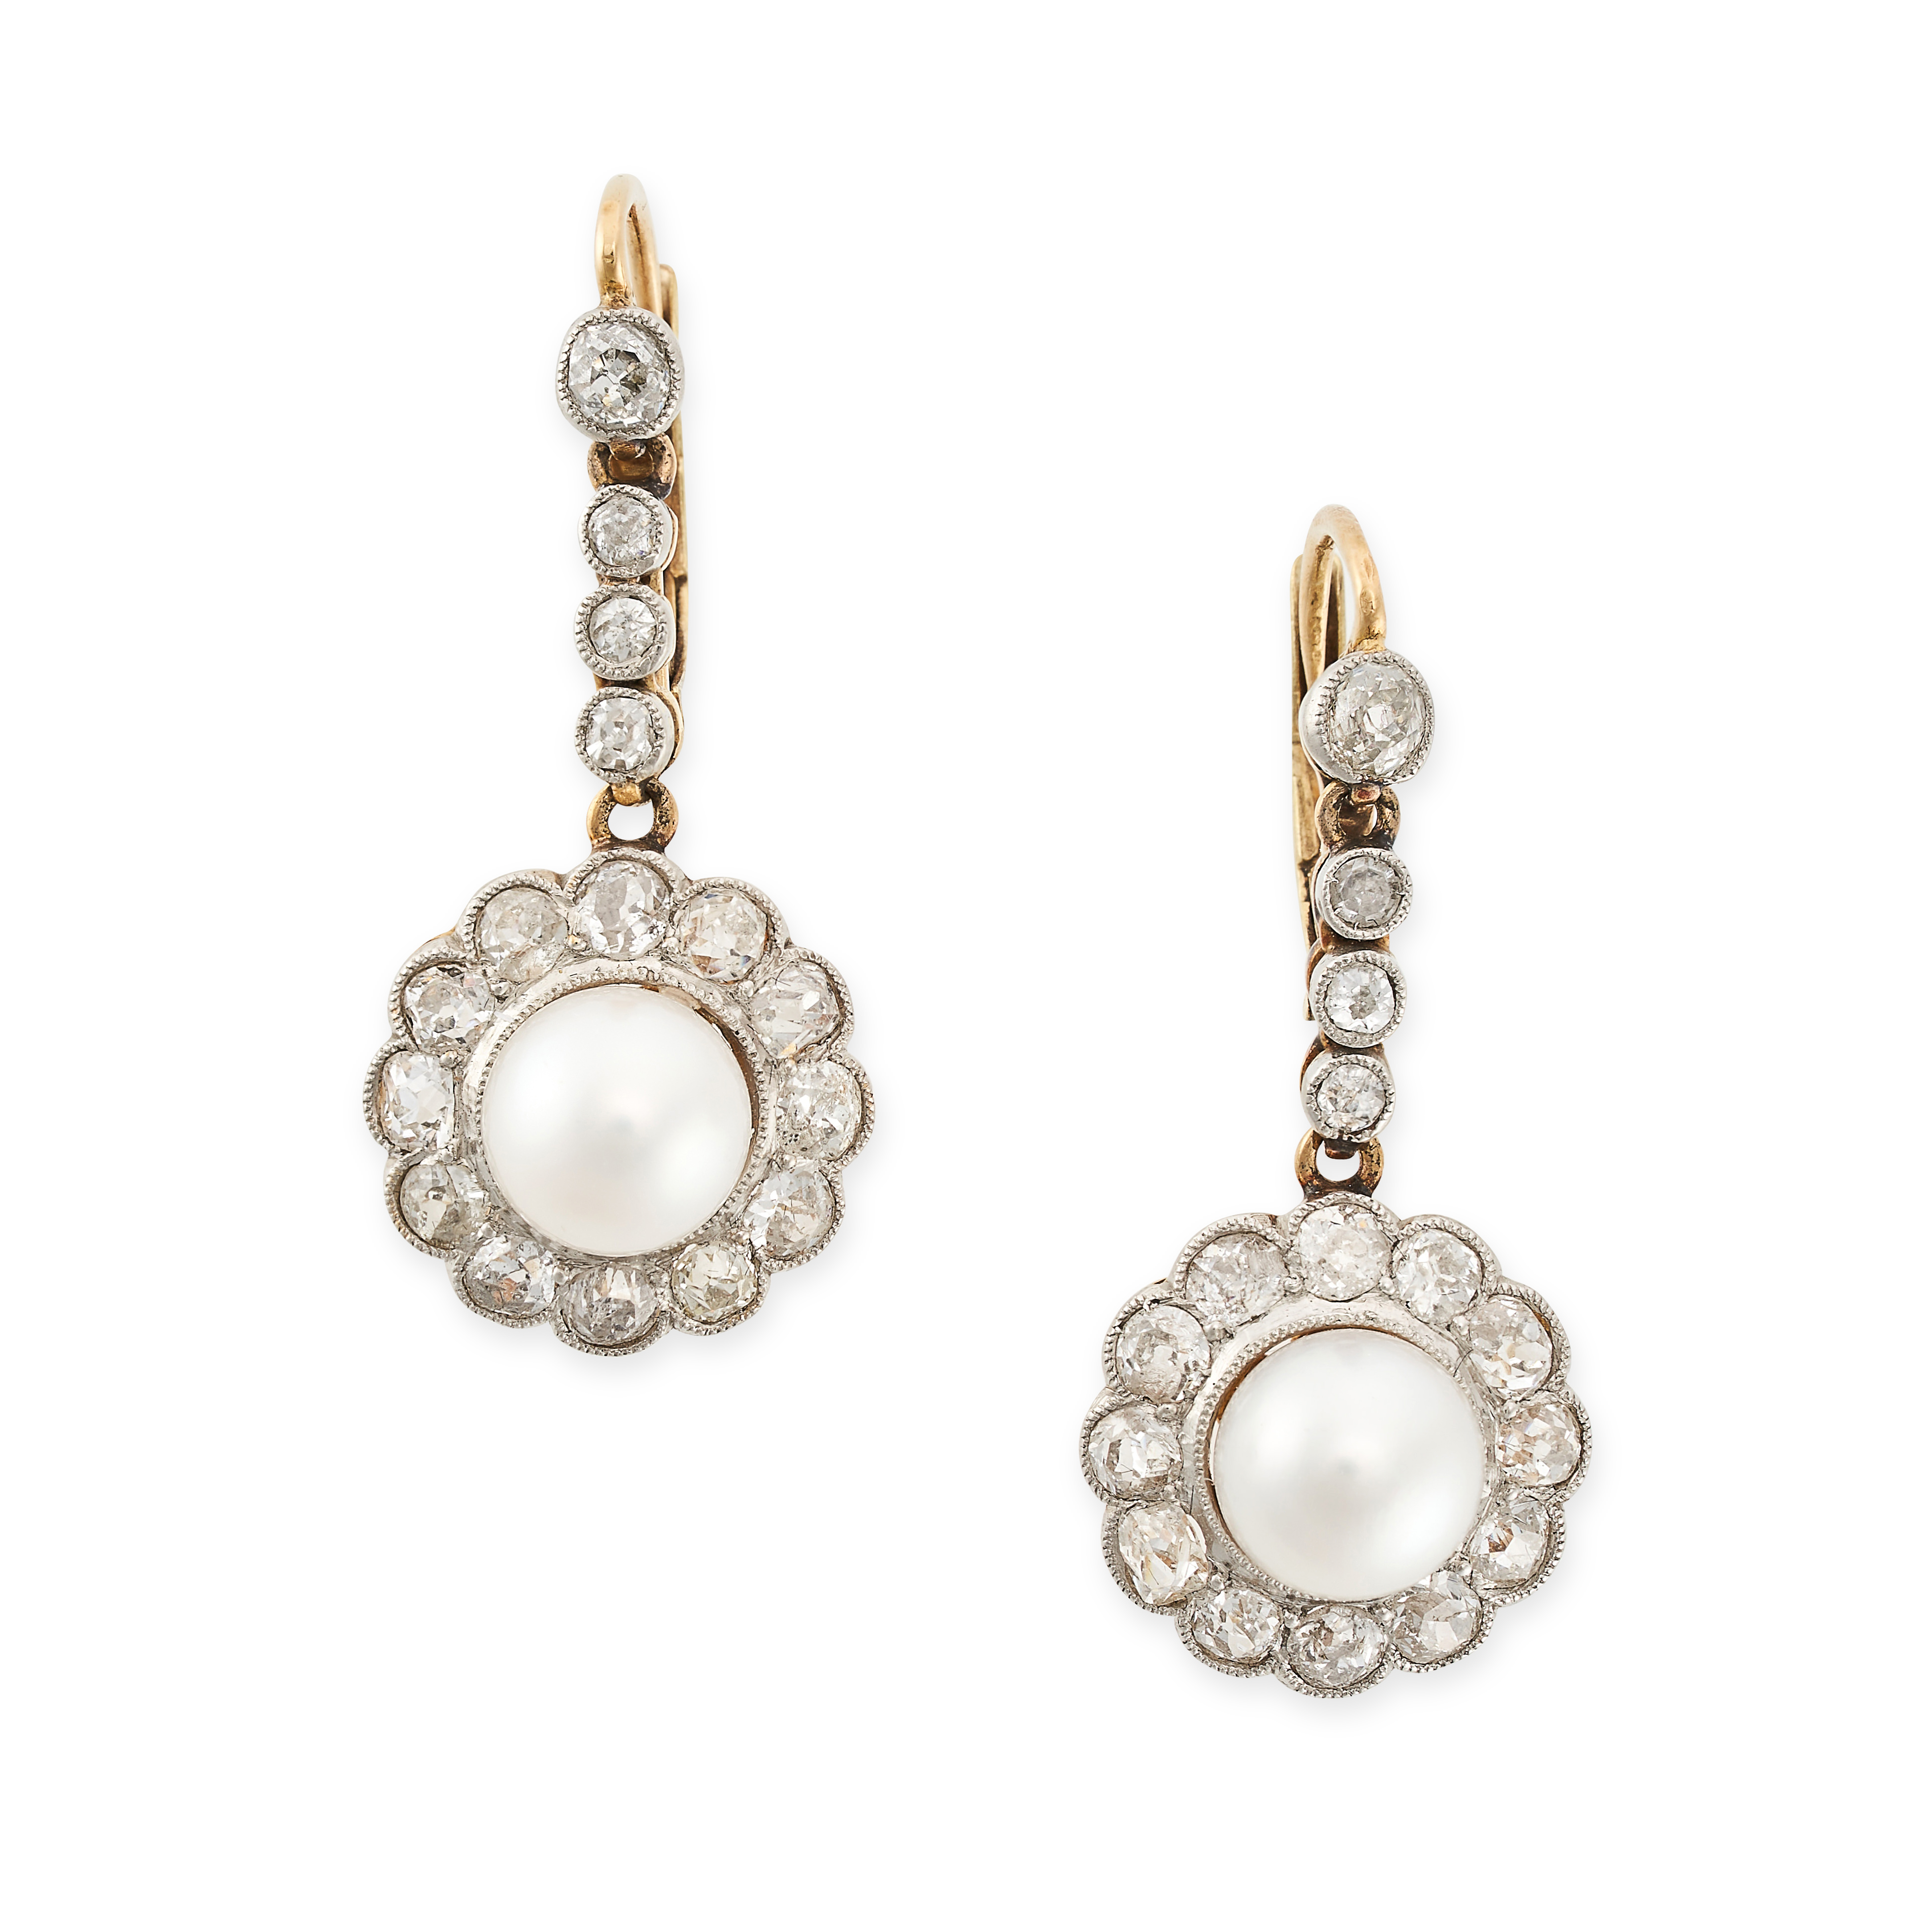 A PAIR OF DIAMOND AND PEARL DROP EARRINGS in 14ct yellow gold, each set with a row of old cut dia...